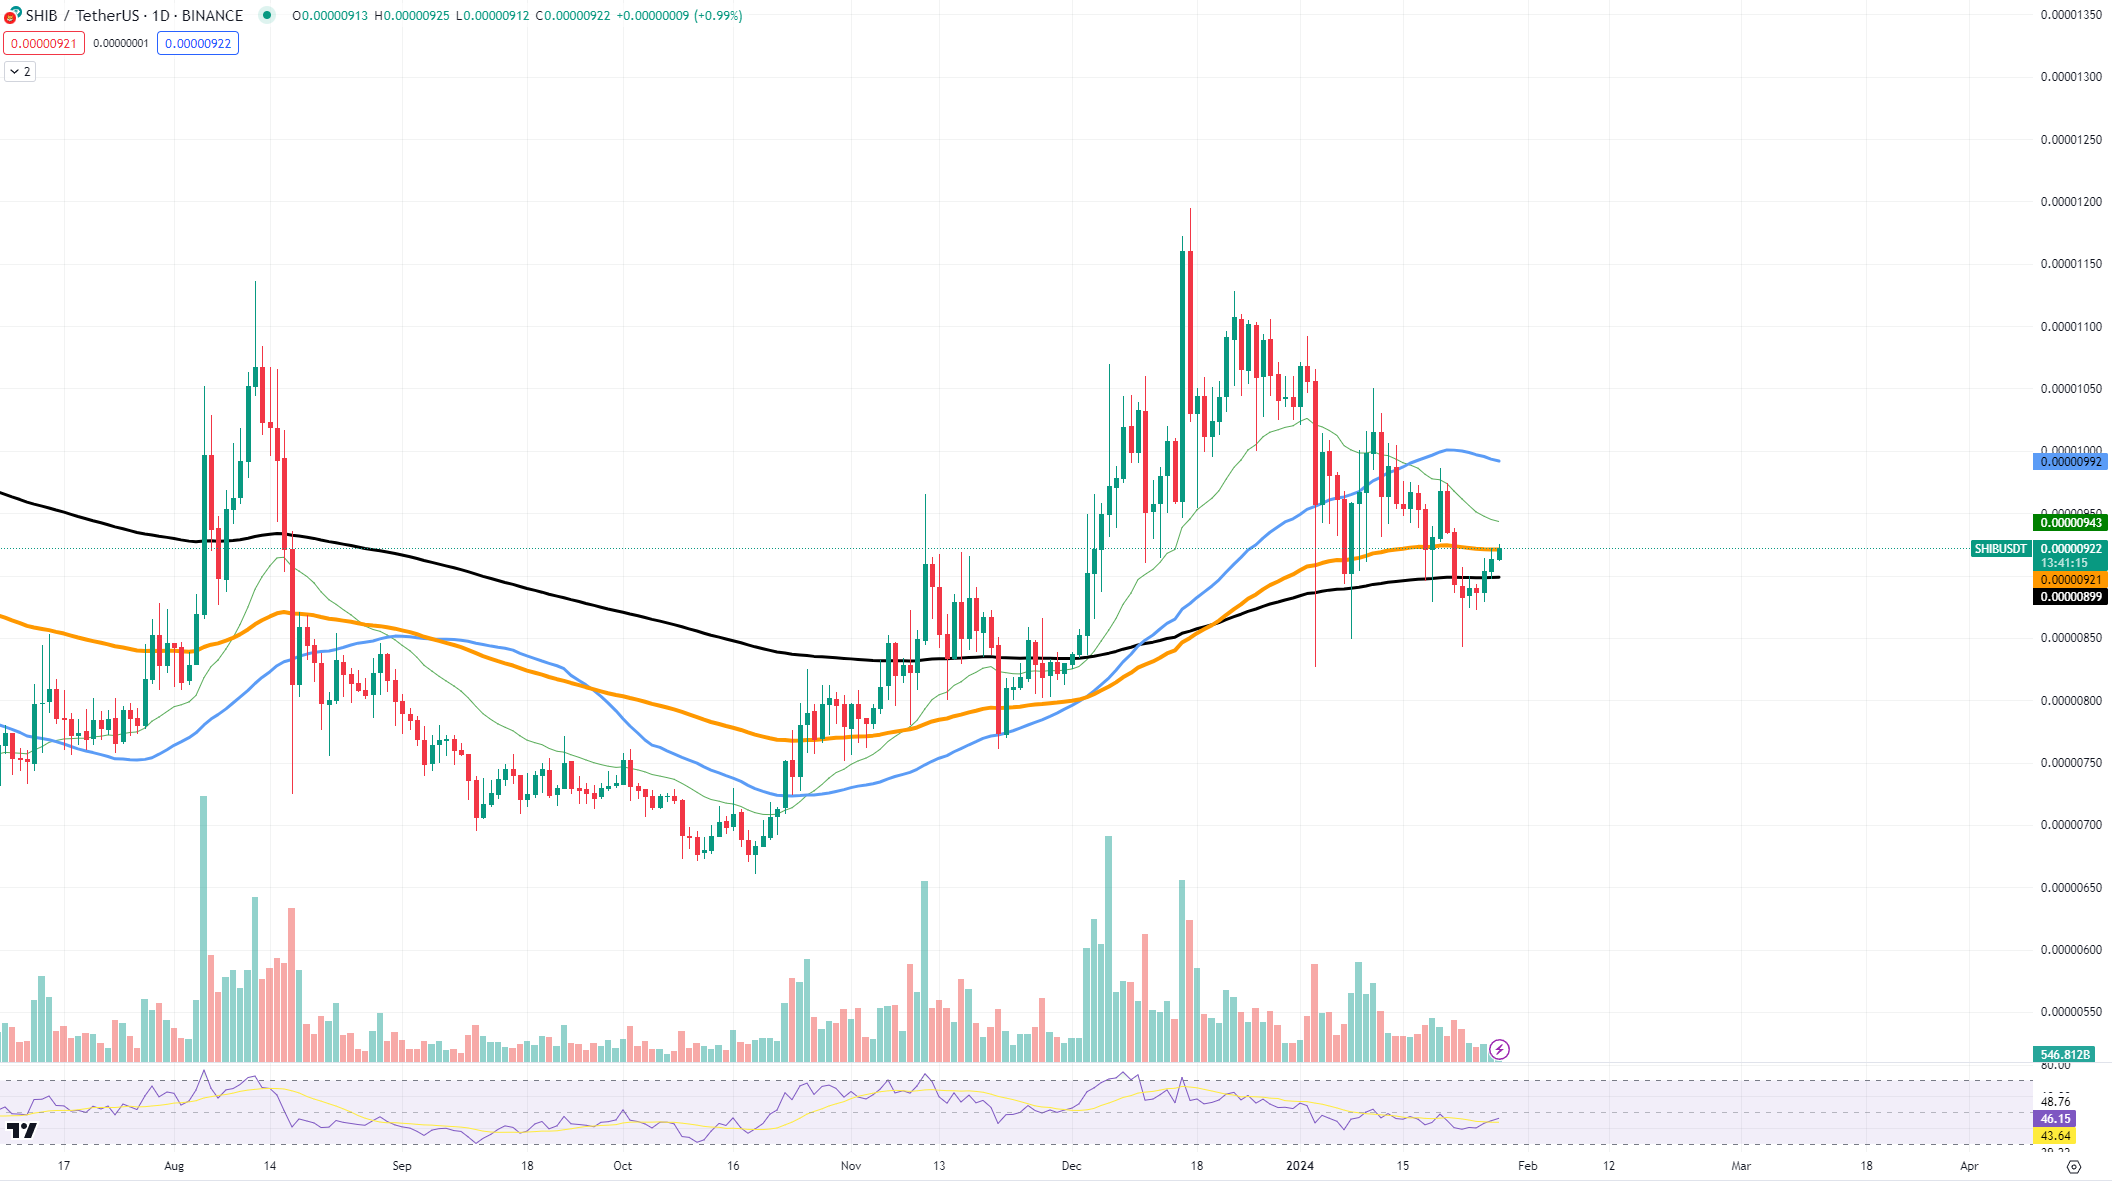 Shiba Inu (SHIB) Survives for Now, XRP Pressured in This Descending Channel, Is Cardano (ADA) Growth Premature?